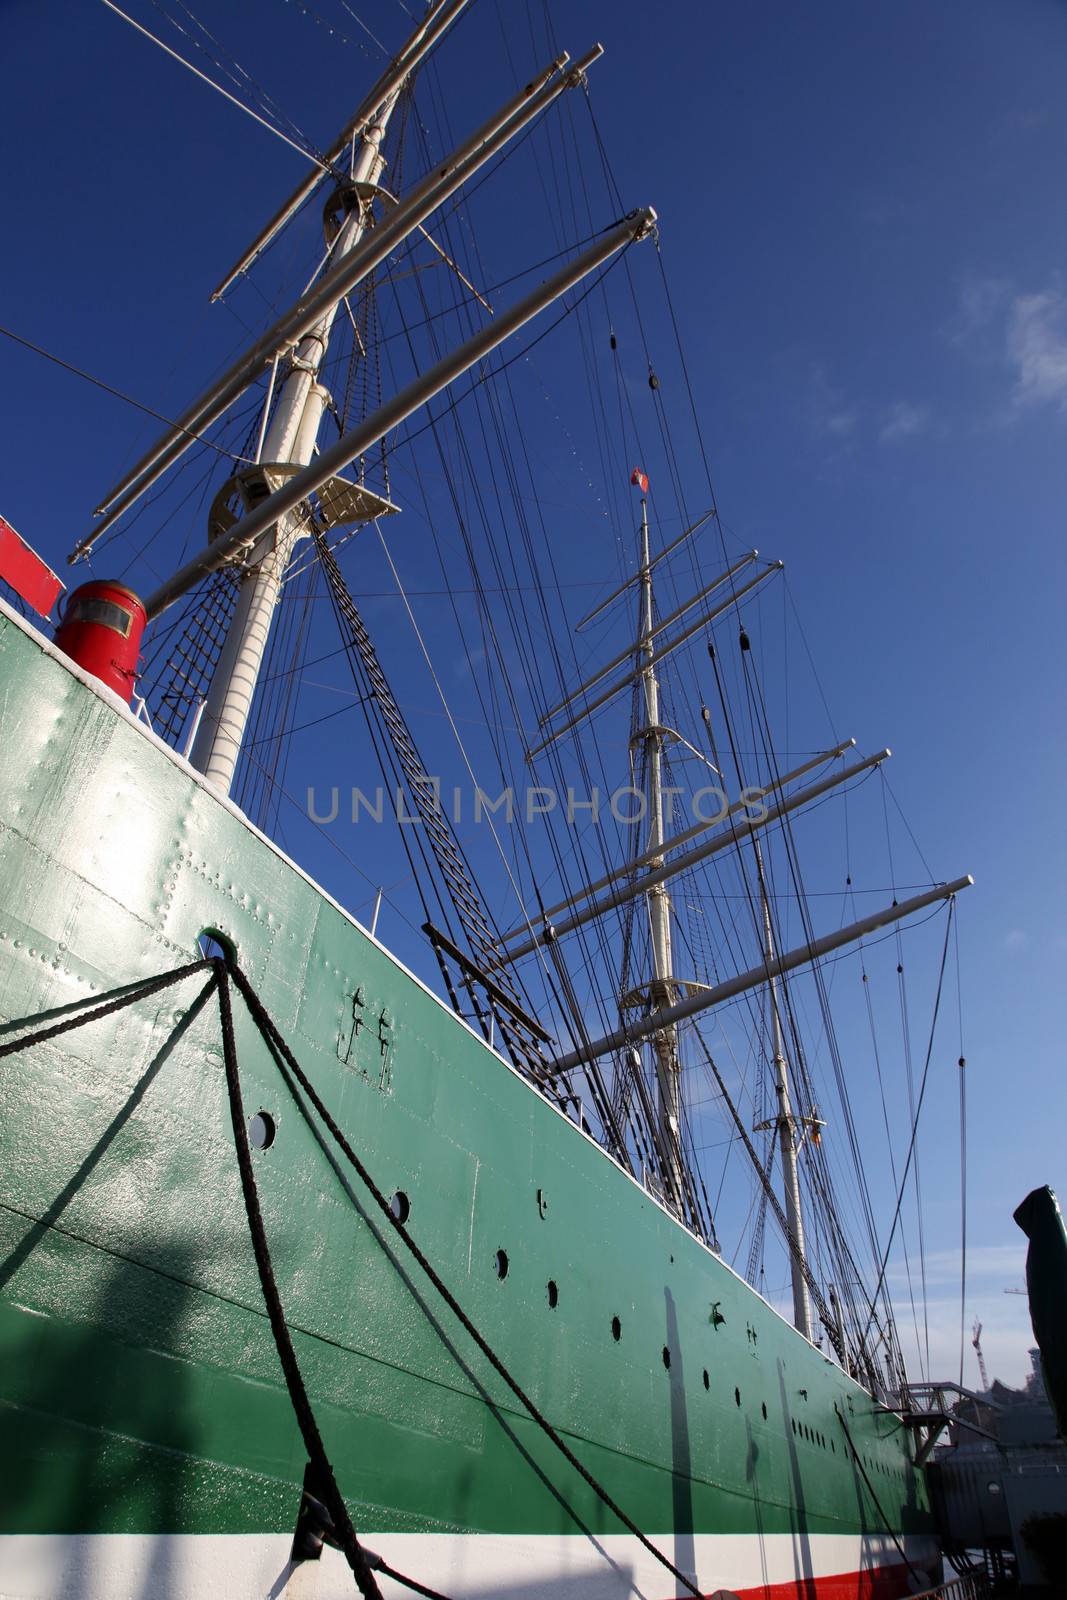 Hull and rigging of a tall ship by Farina6000